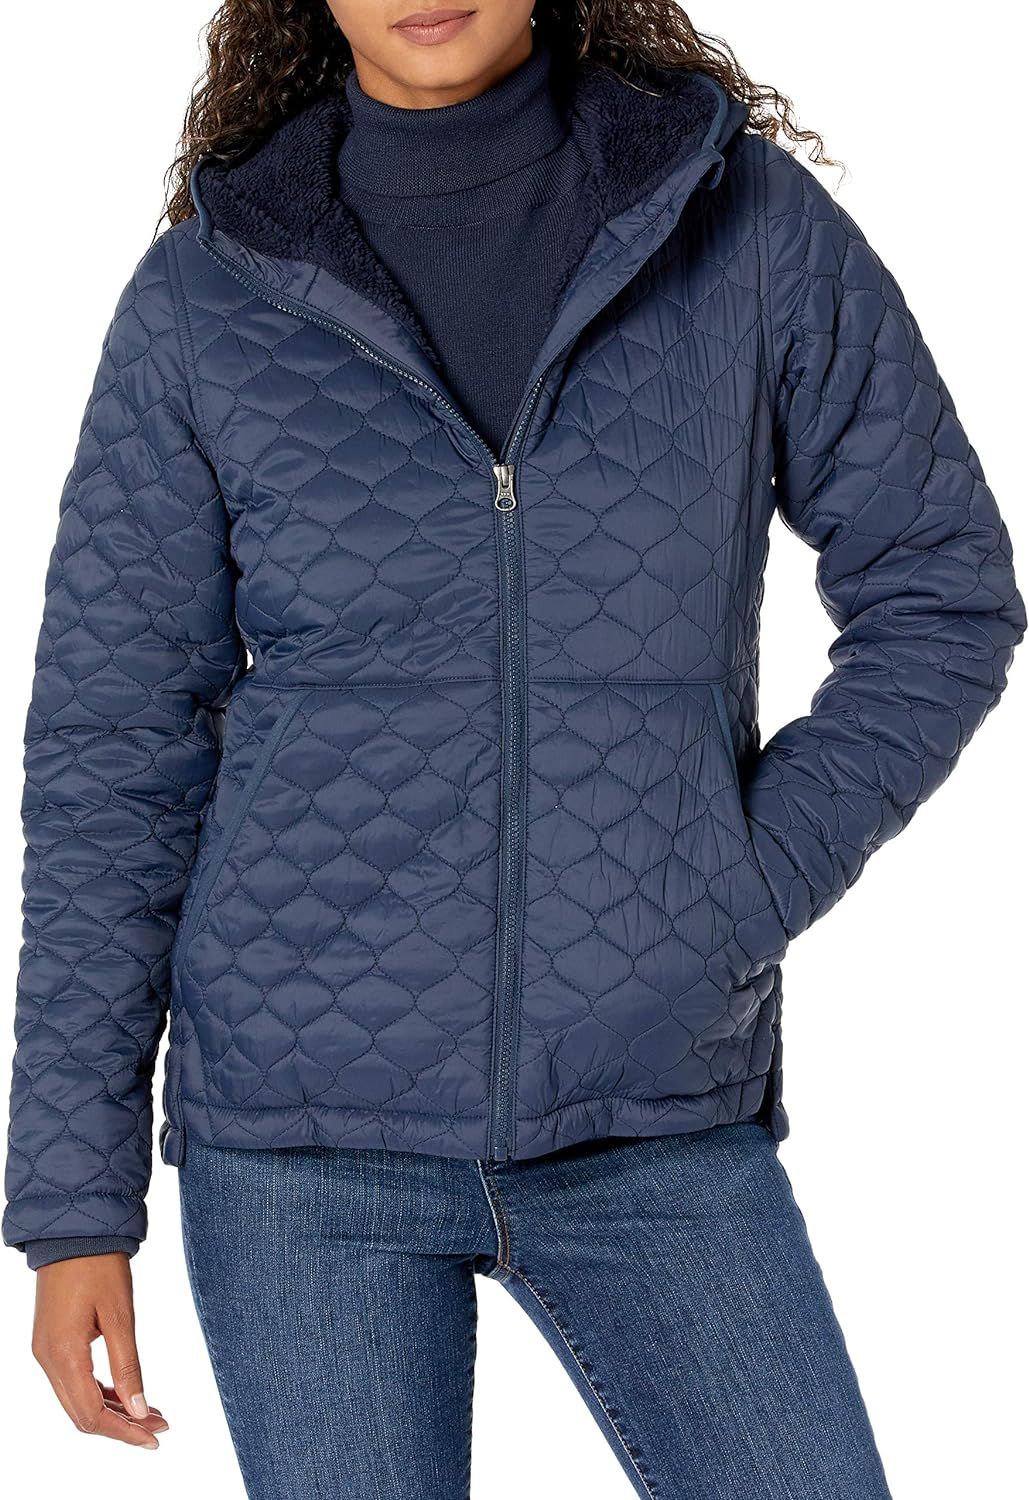 Amazon Essentials Women's Lightweight Water-Resistant Sherpa-Lined Hooded Puffer | Amazon (US)